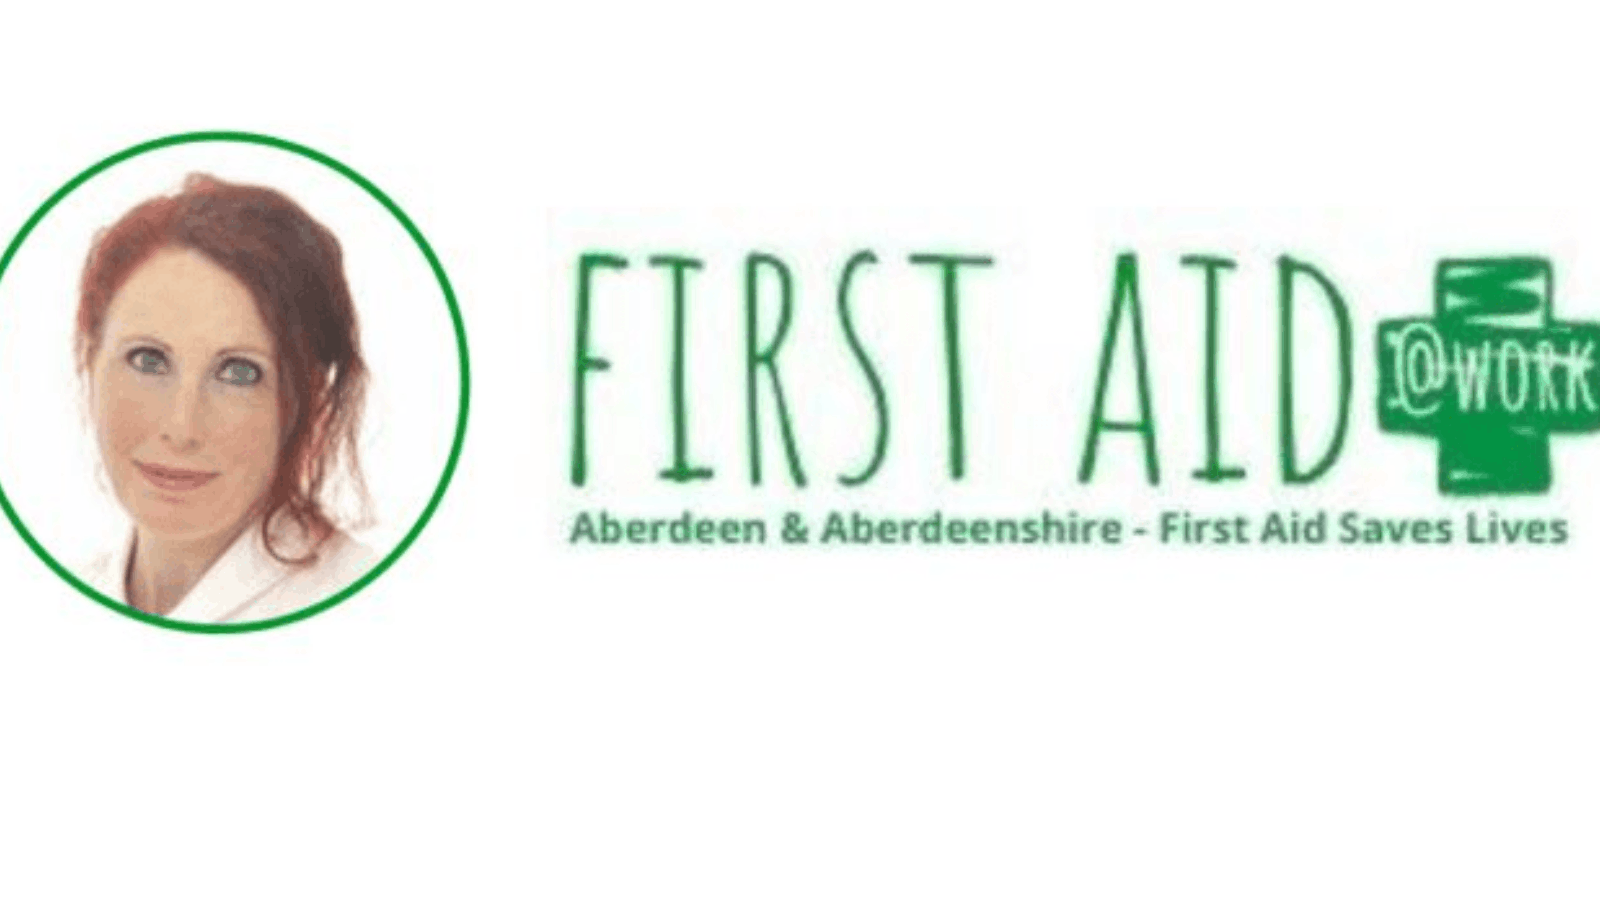 FirstAid@Work Aberdeen and Aberdeenshire joins the Chamber